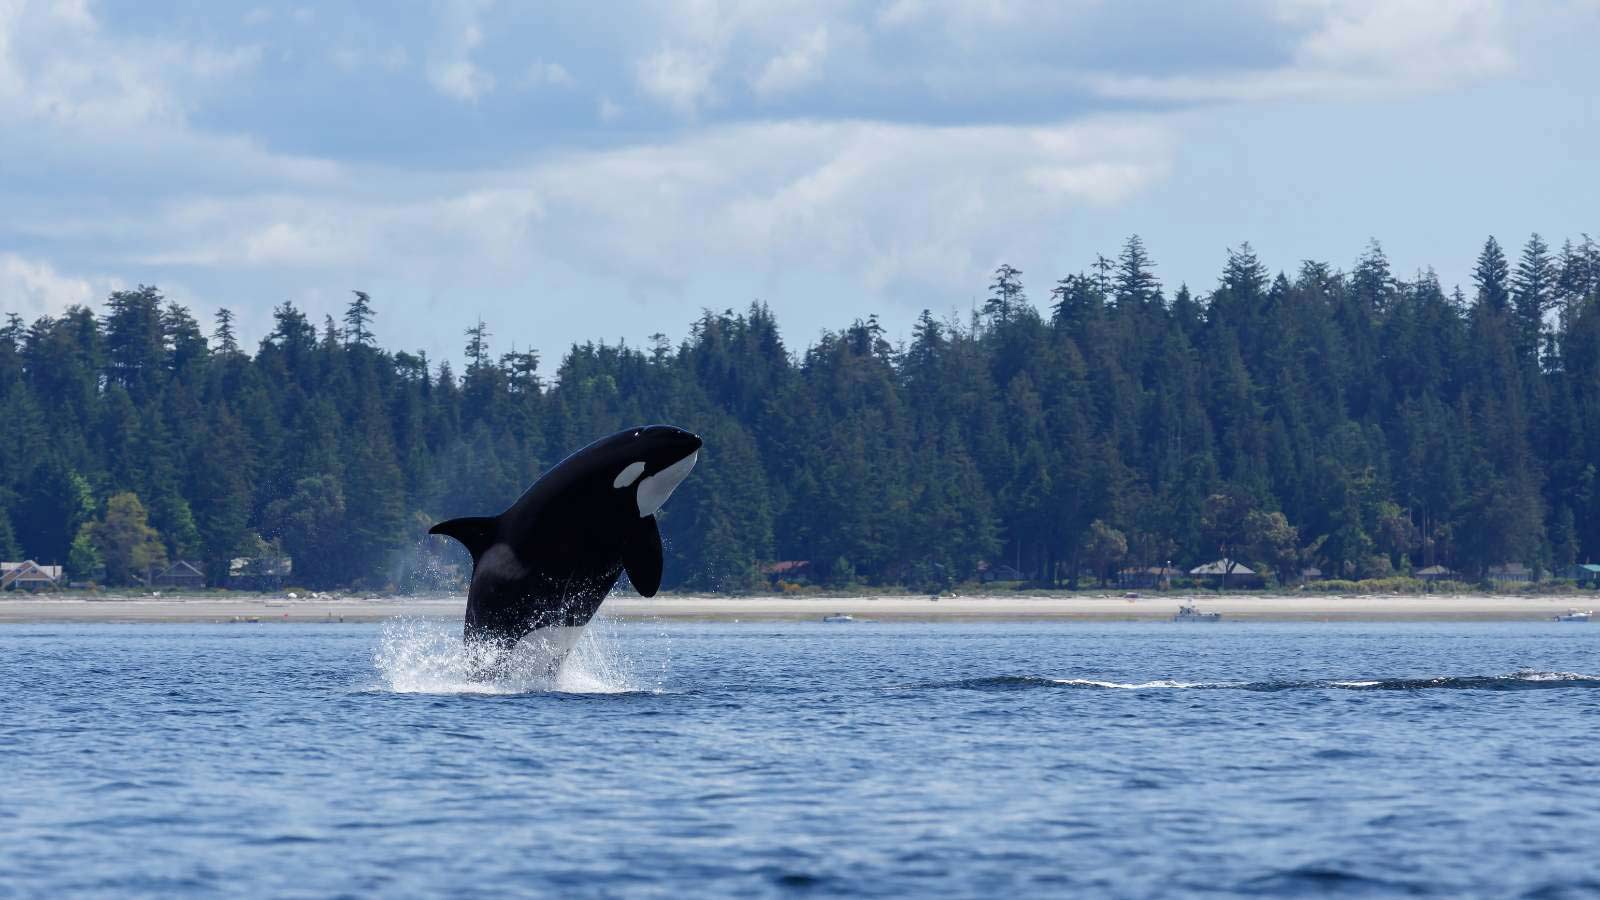 <p>Located in the northwest corner of Washington state in Puget Sound, Orca Island has a population of just over 5,000 people and is only 57 square miles. Orcas can be seen in the waters around the island all year round, but the best time to see them is during the salmon run between May and October.</p>